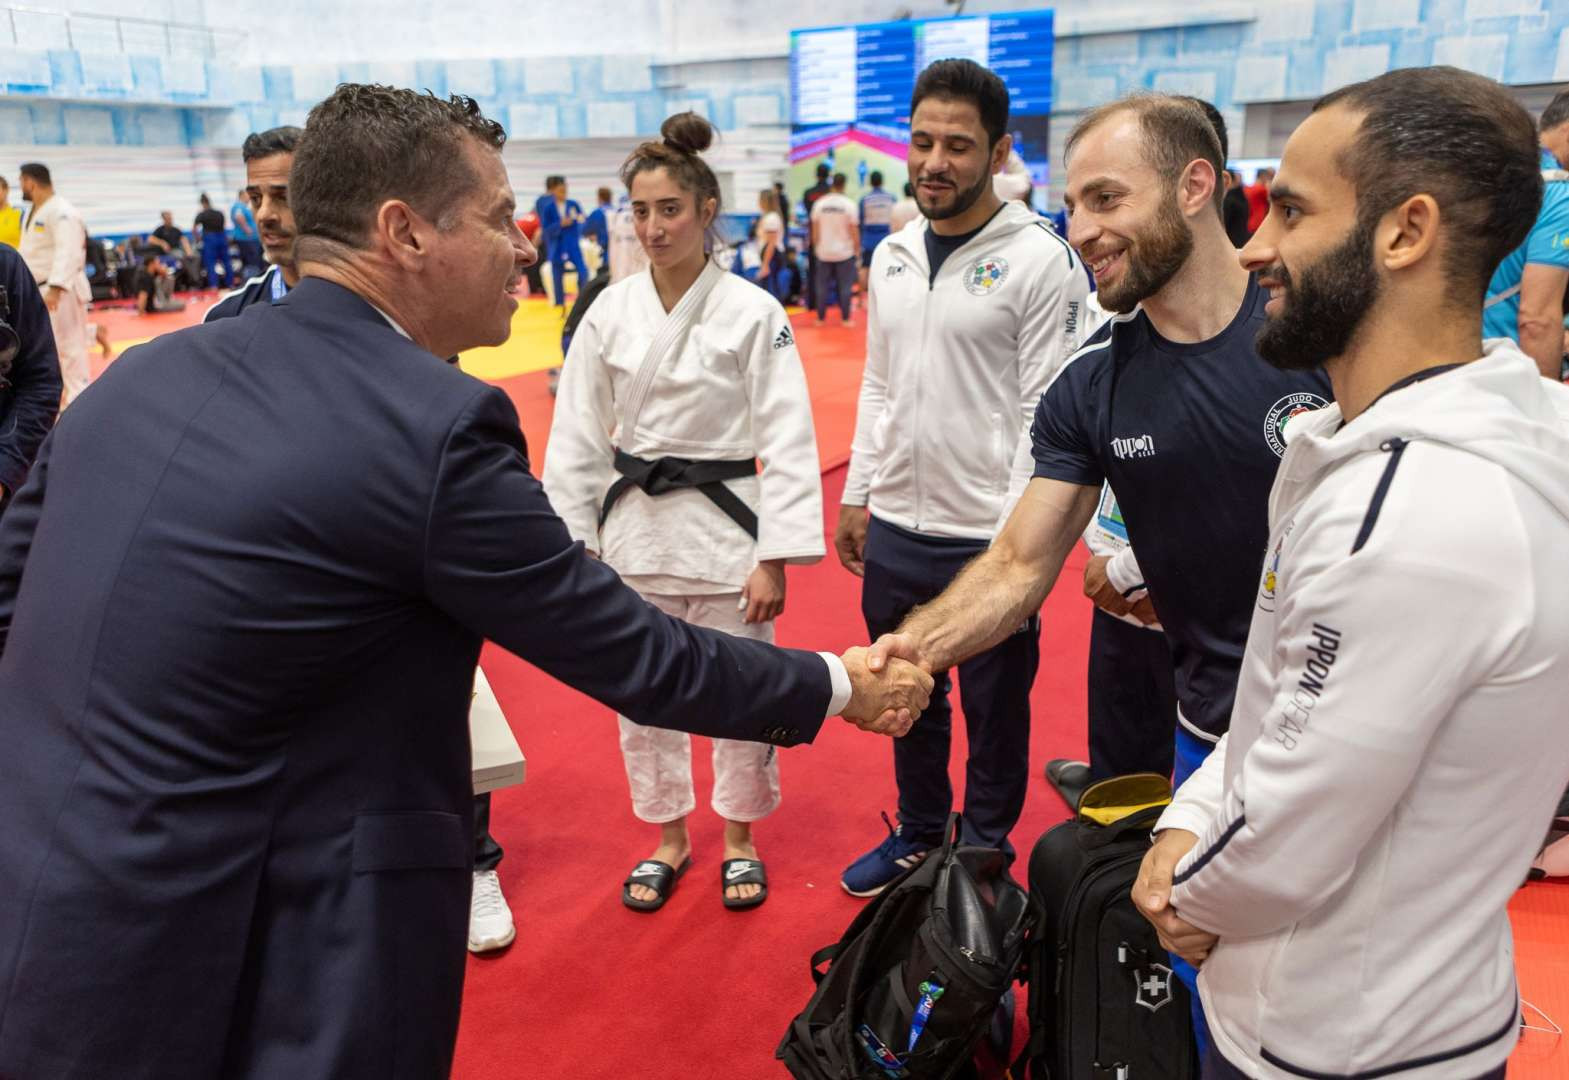 Kit McConnell praised the IJF's work in supporting refugee athletes at the Judo World Championships ©IJF